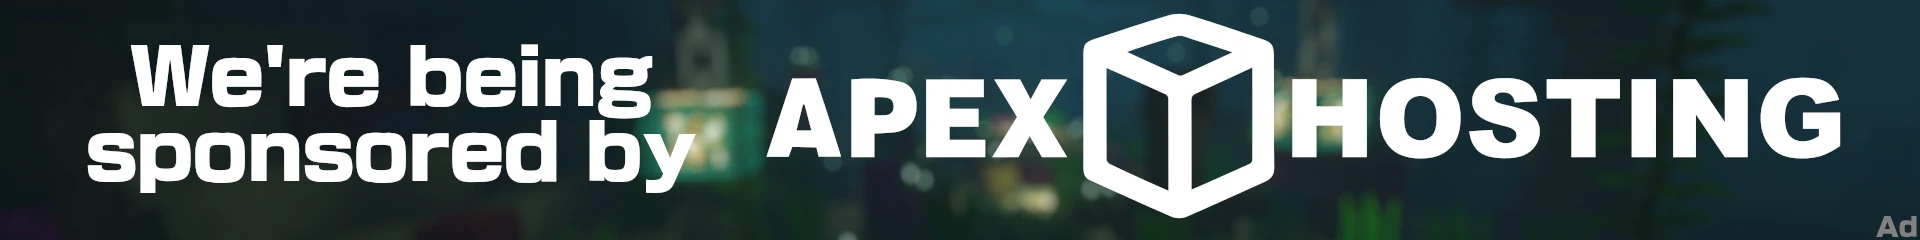 We're sponsored by Apex Hosting. Get started in less than five minutes: Java and Bedrock edition, 24/7 support.